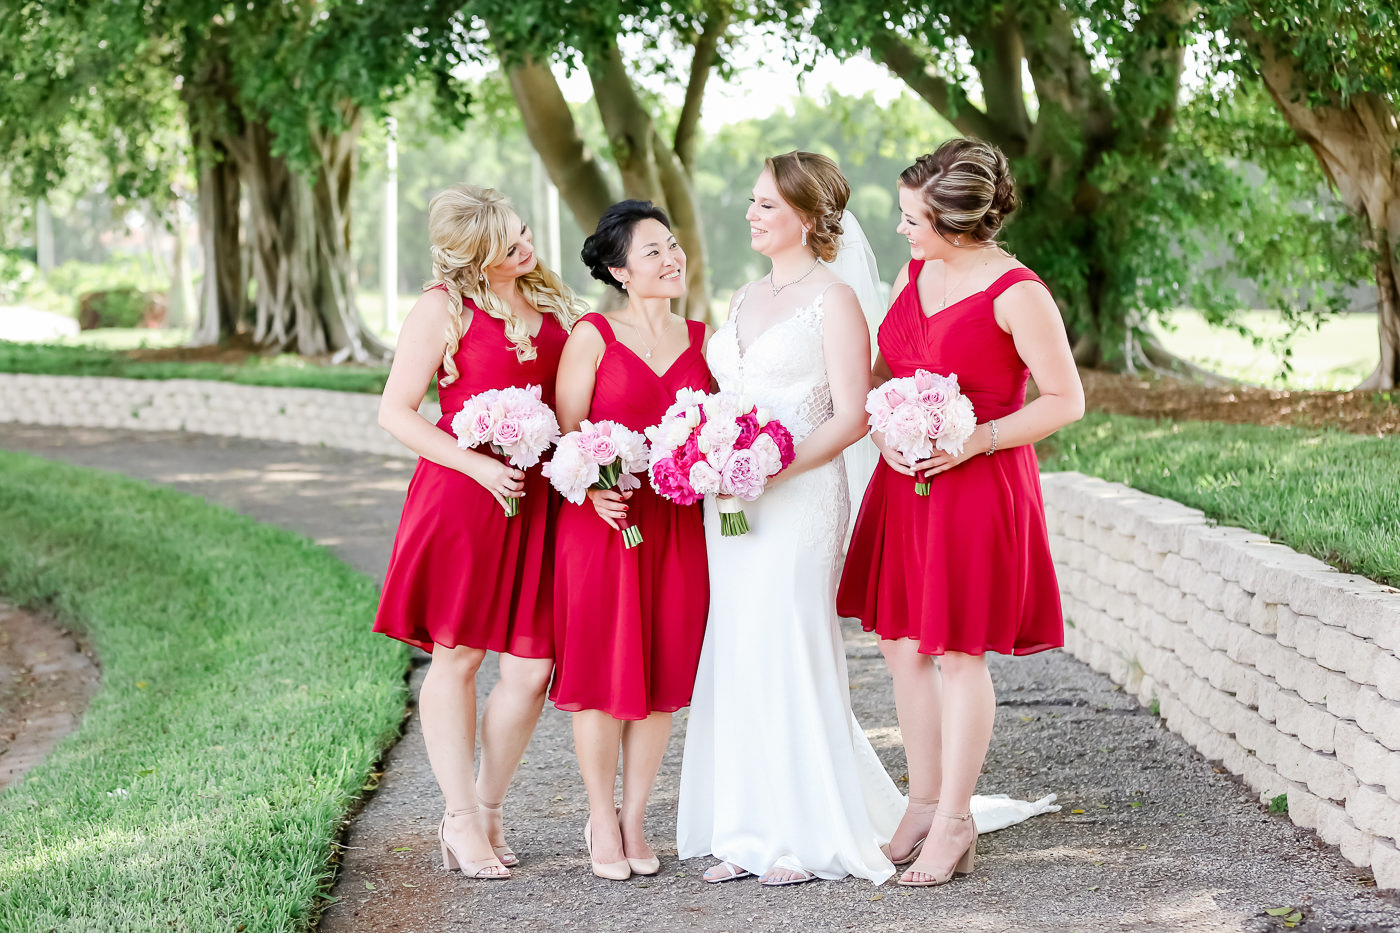 Classic Bride in Fitted Lace with Skinny Straps and V Neckline Stella York Wedding Dress, Bridesmaids in Short Red Matching Dresses Holding Pink Floral Bouquets | Tampa Bay Wedding Photographer Lifelong Photography Studios | Wedding Hair and Makeup Michele Renee the Studio